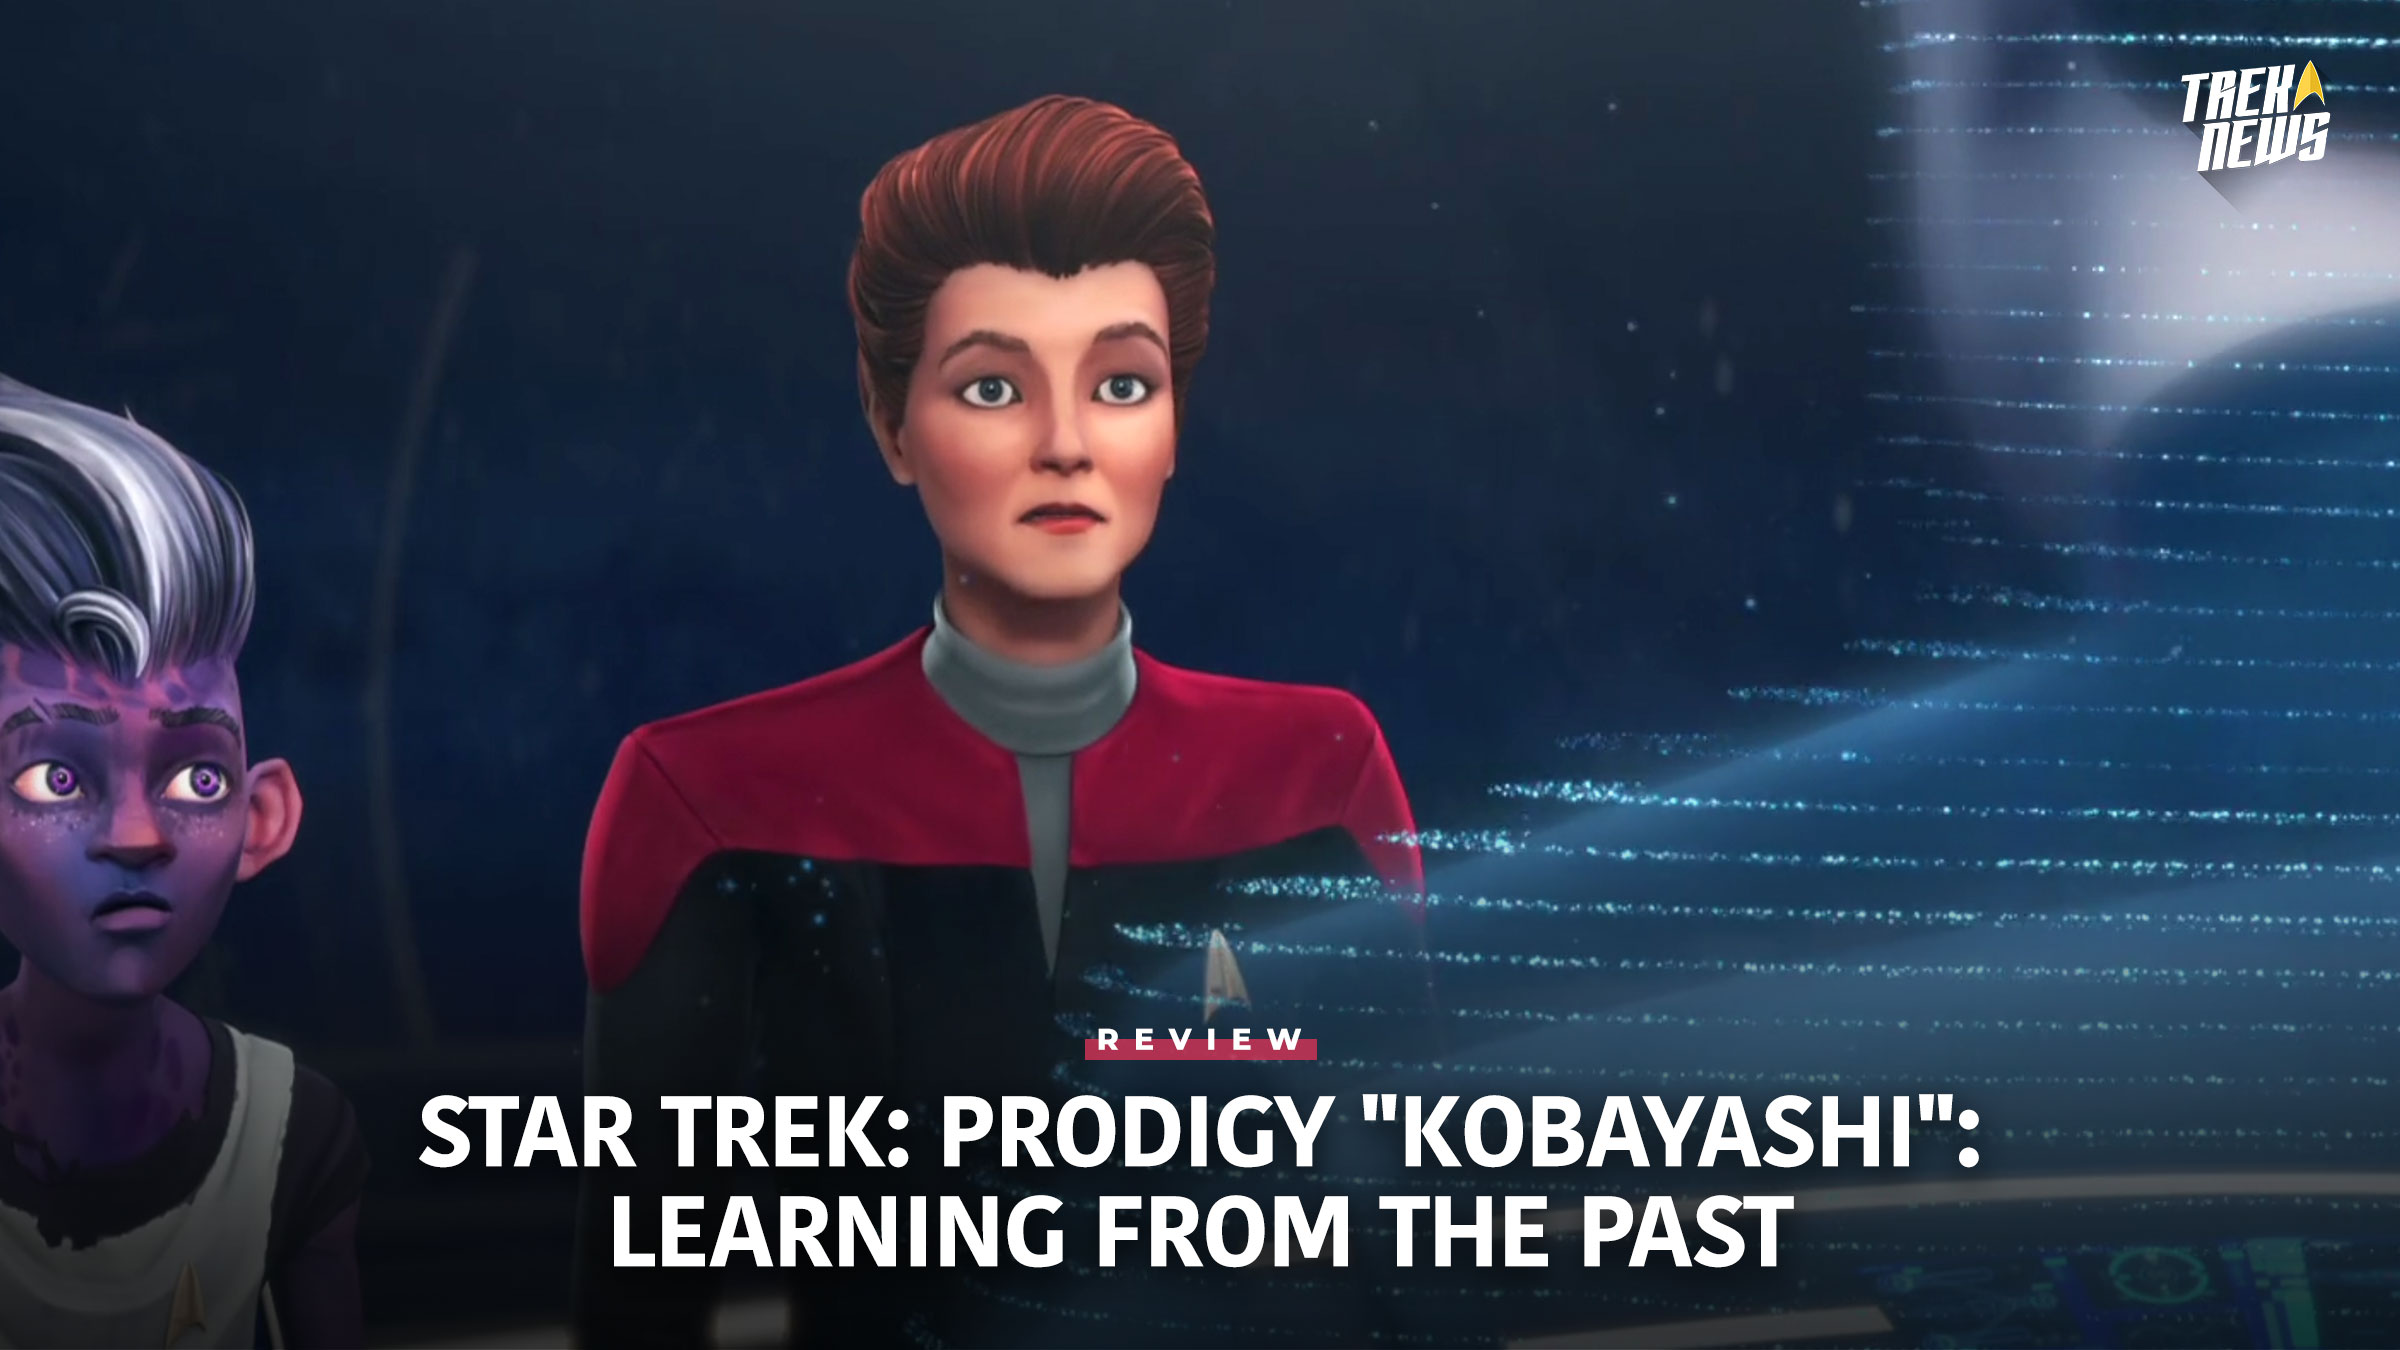 Star Trek: Prodigy “Kobayashi” Review: Learning From The Past